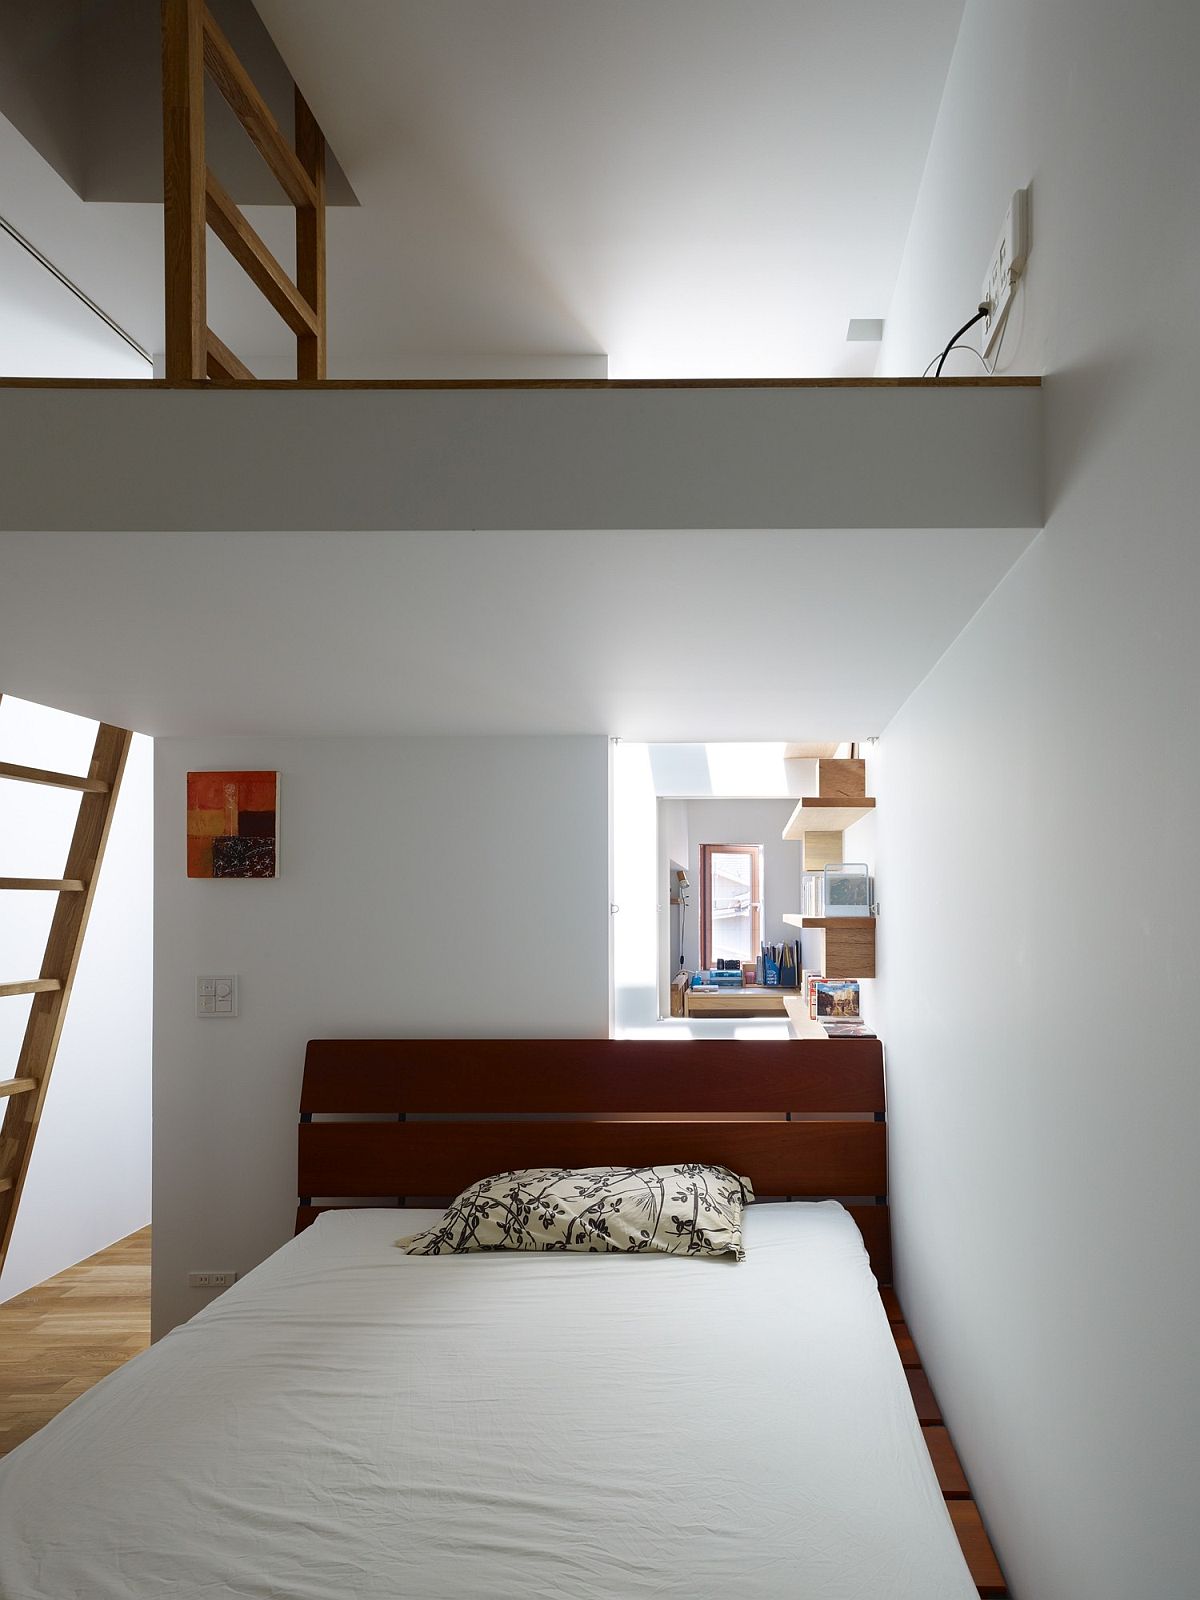 Loft level bedroom of the house with multiple sleeping areas